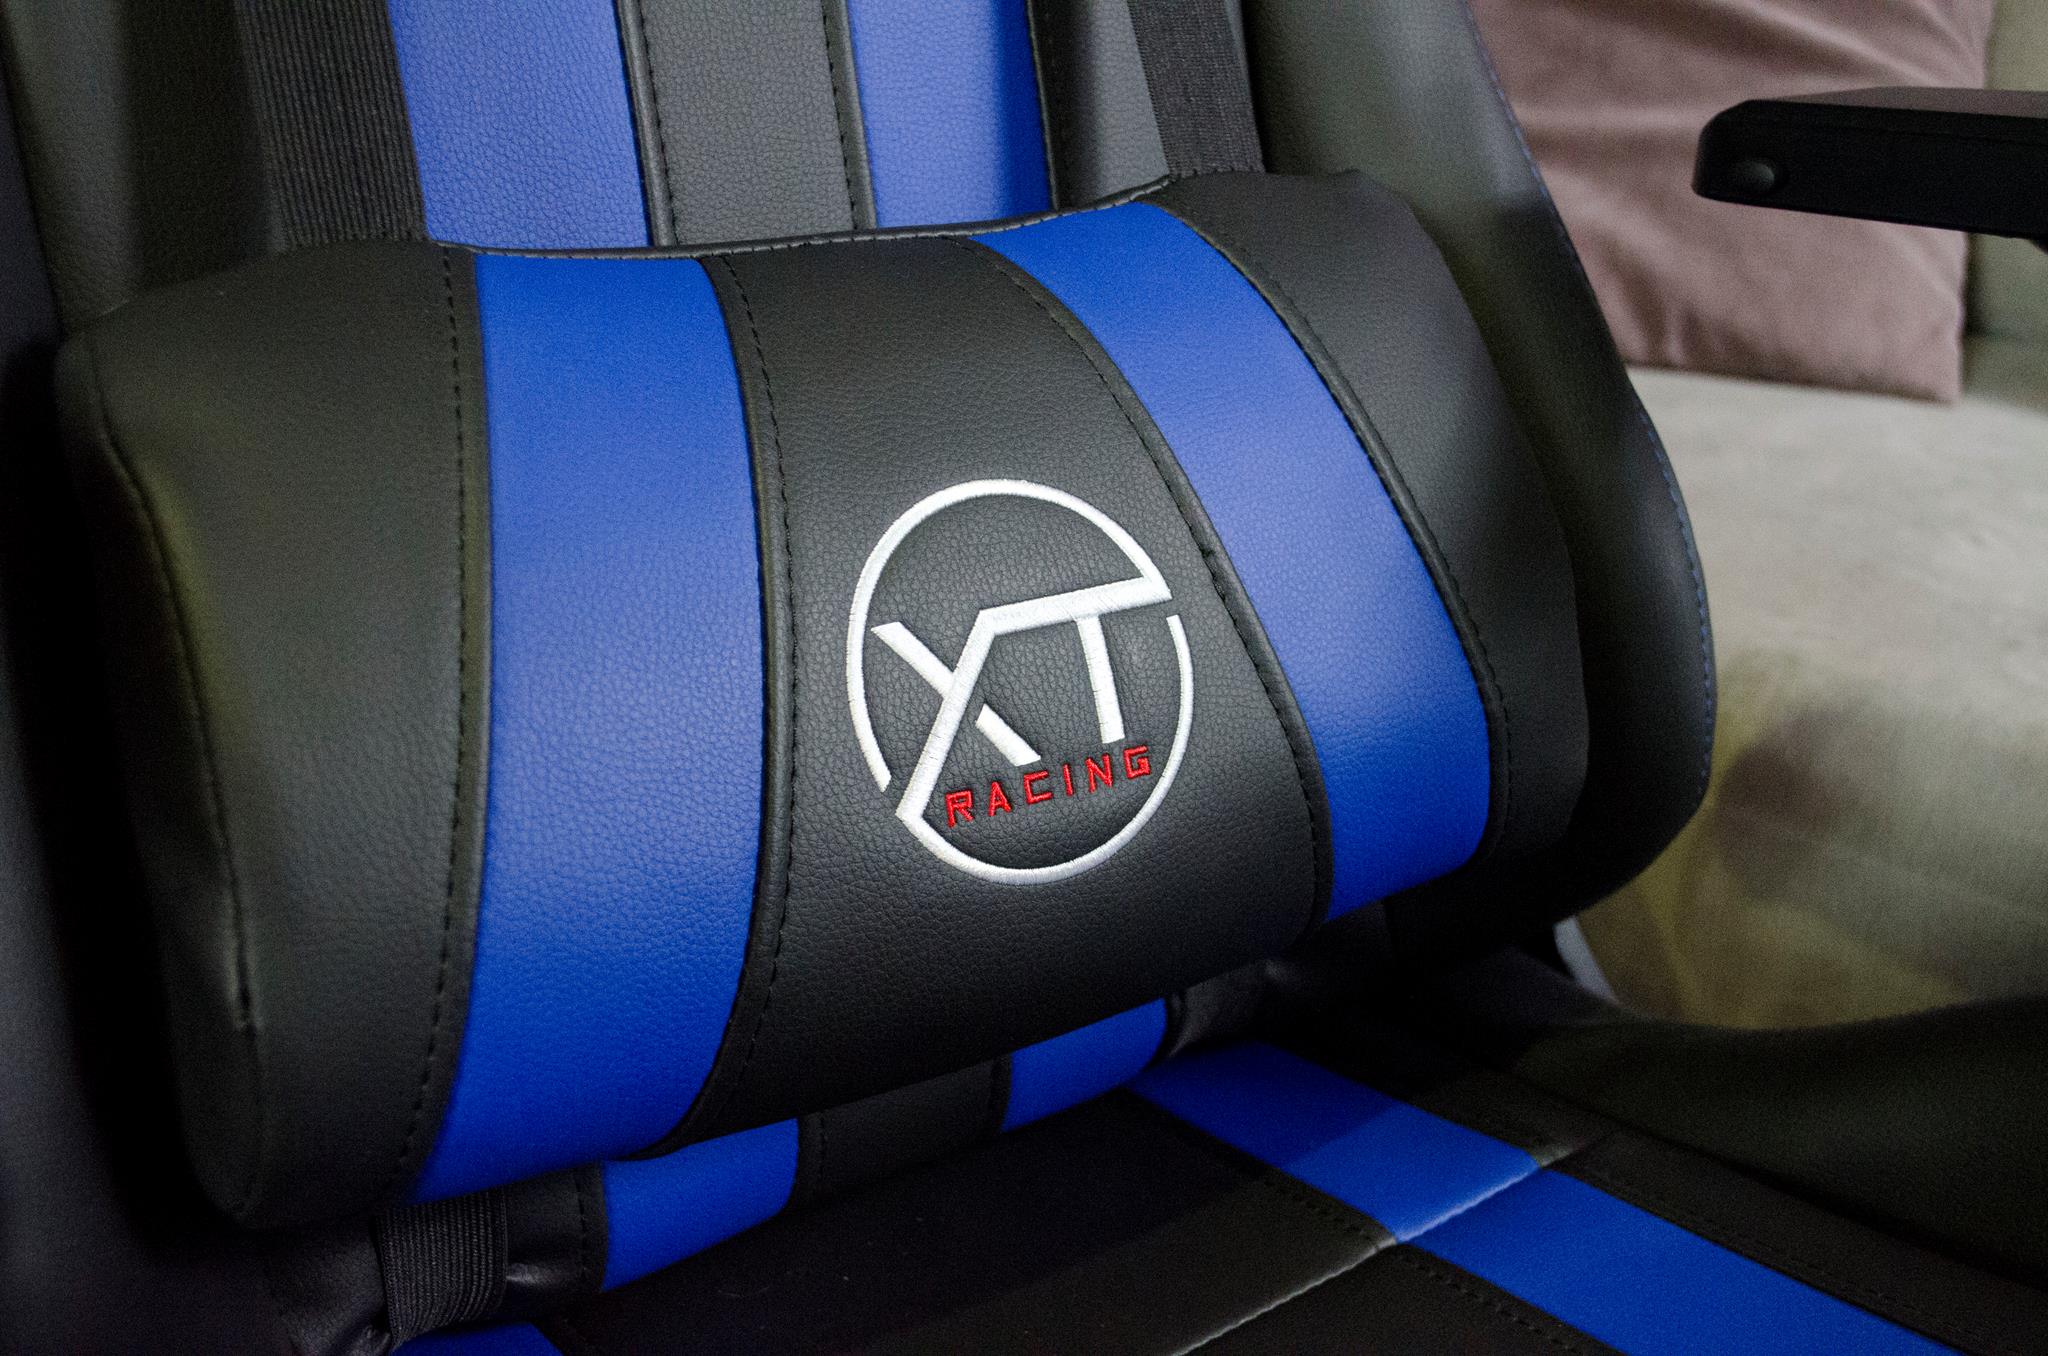 xt racing evo series gaming chair review 1